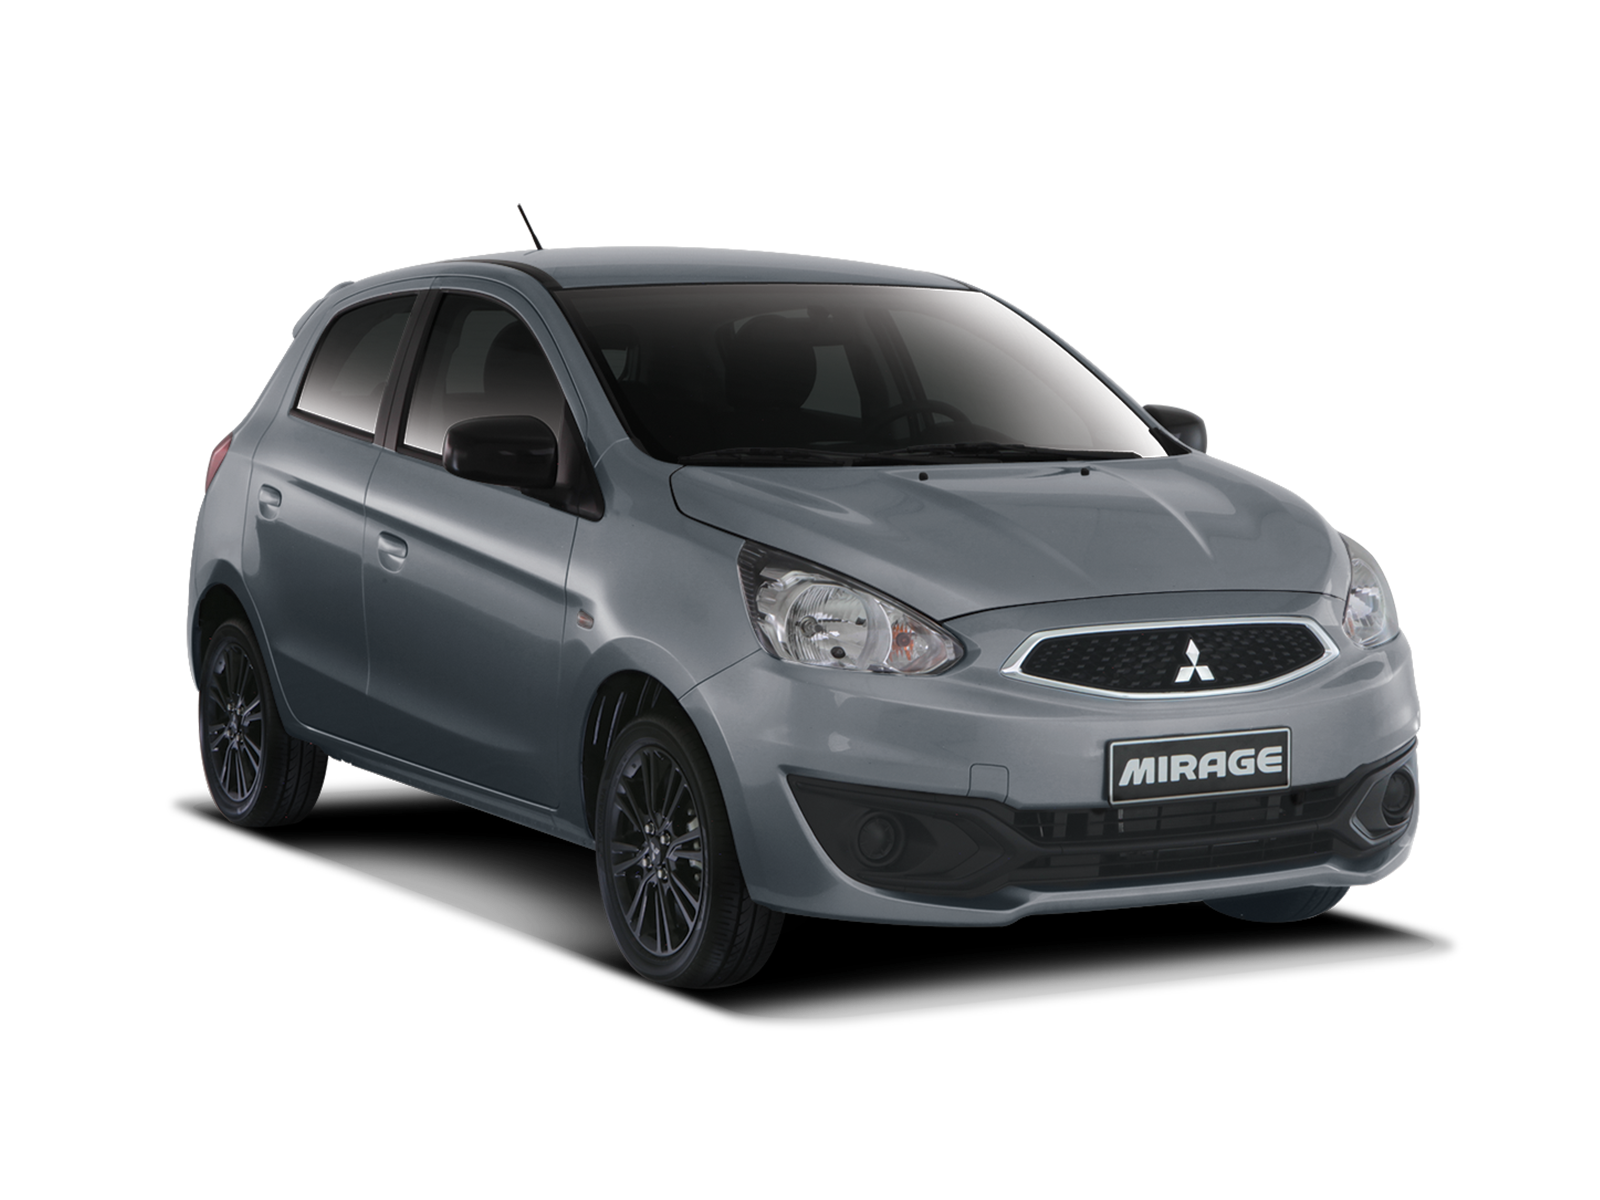 2017 Mitsubishi Mirage Research photos specs and expertise  CarMax